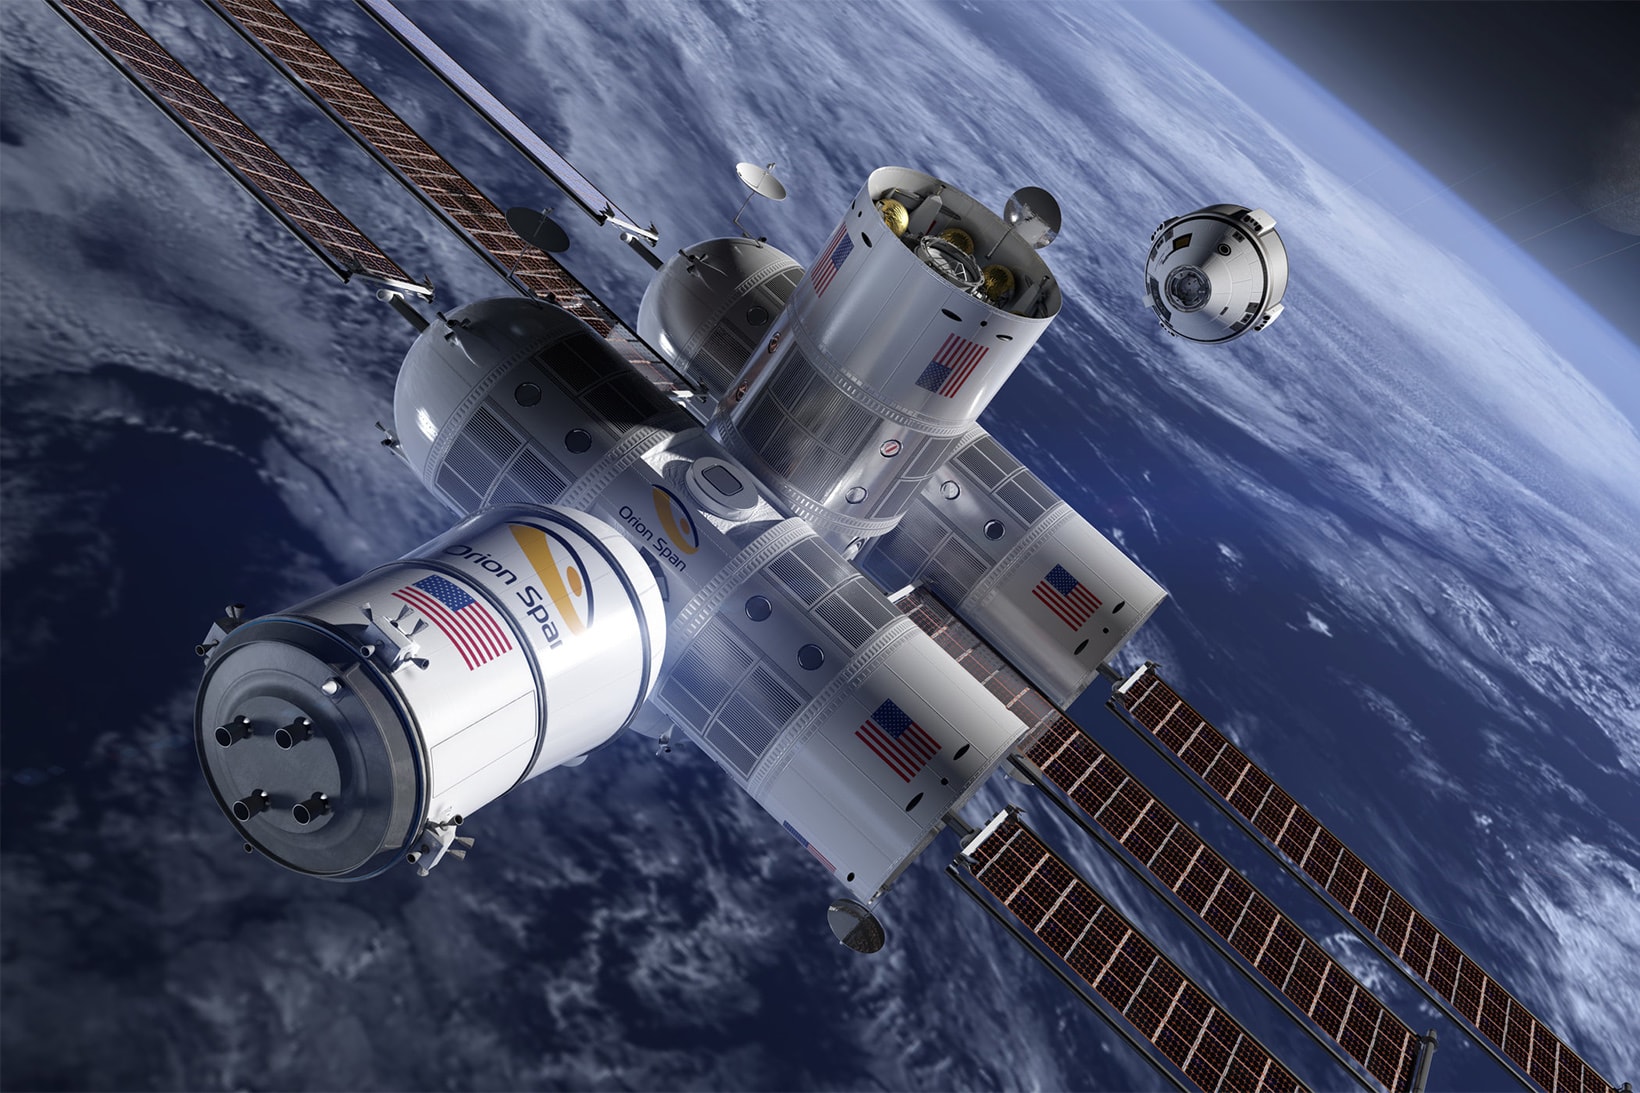 Orion Span Aurora Station Luxury Space Hotel 2022 open debut 9 5 million dollars usd trips outer 2021